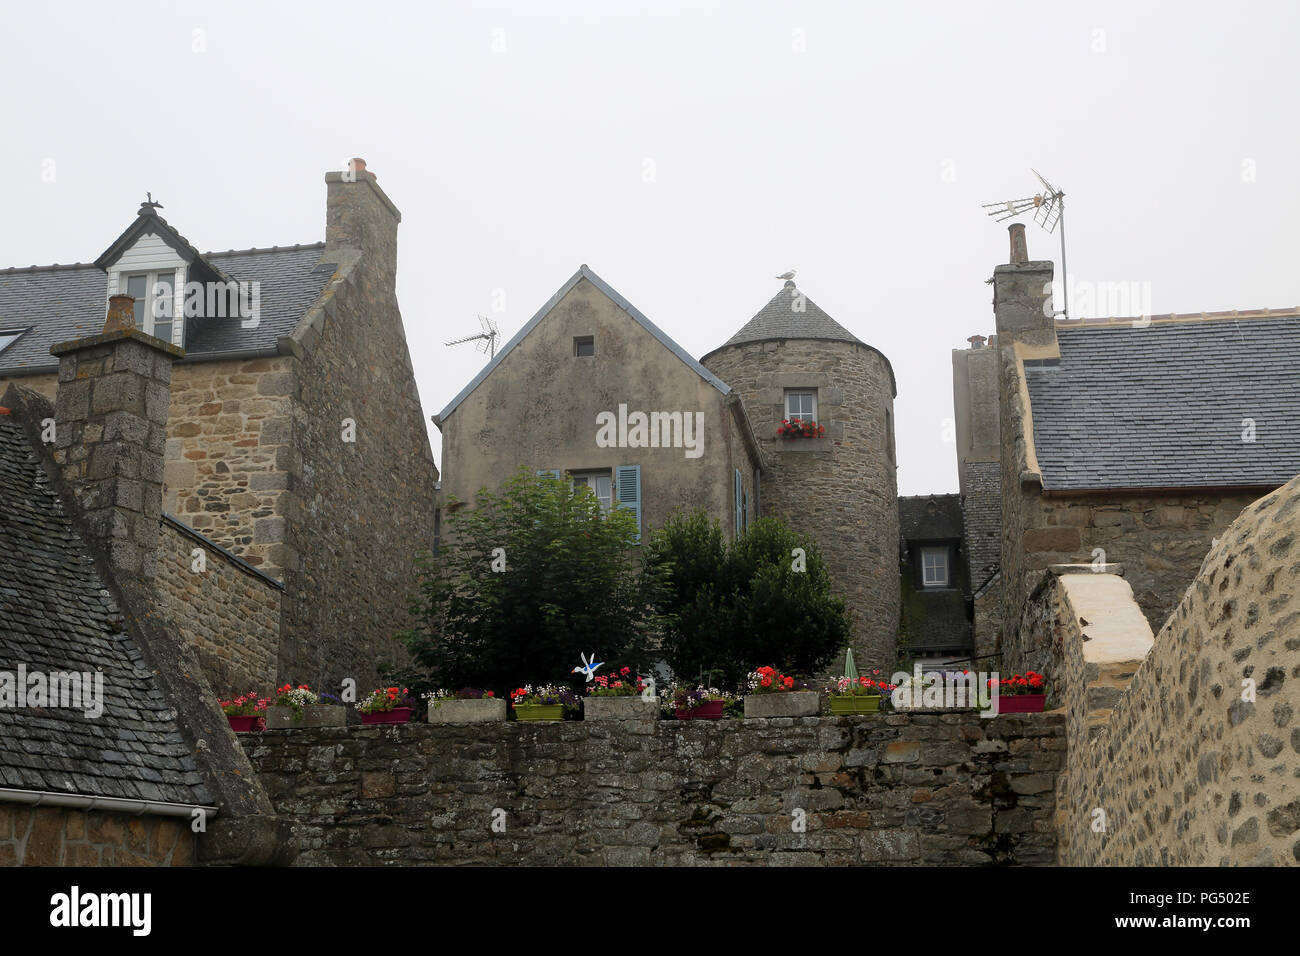 View of backs of buildings from Quai Charles de Gaulle, Roscoff, Finistere, Brittany, France Stock Photo